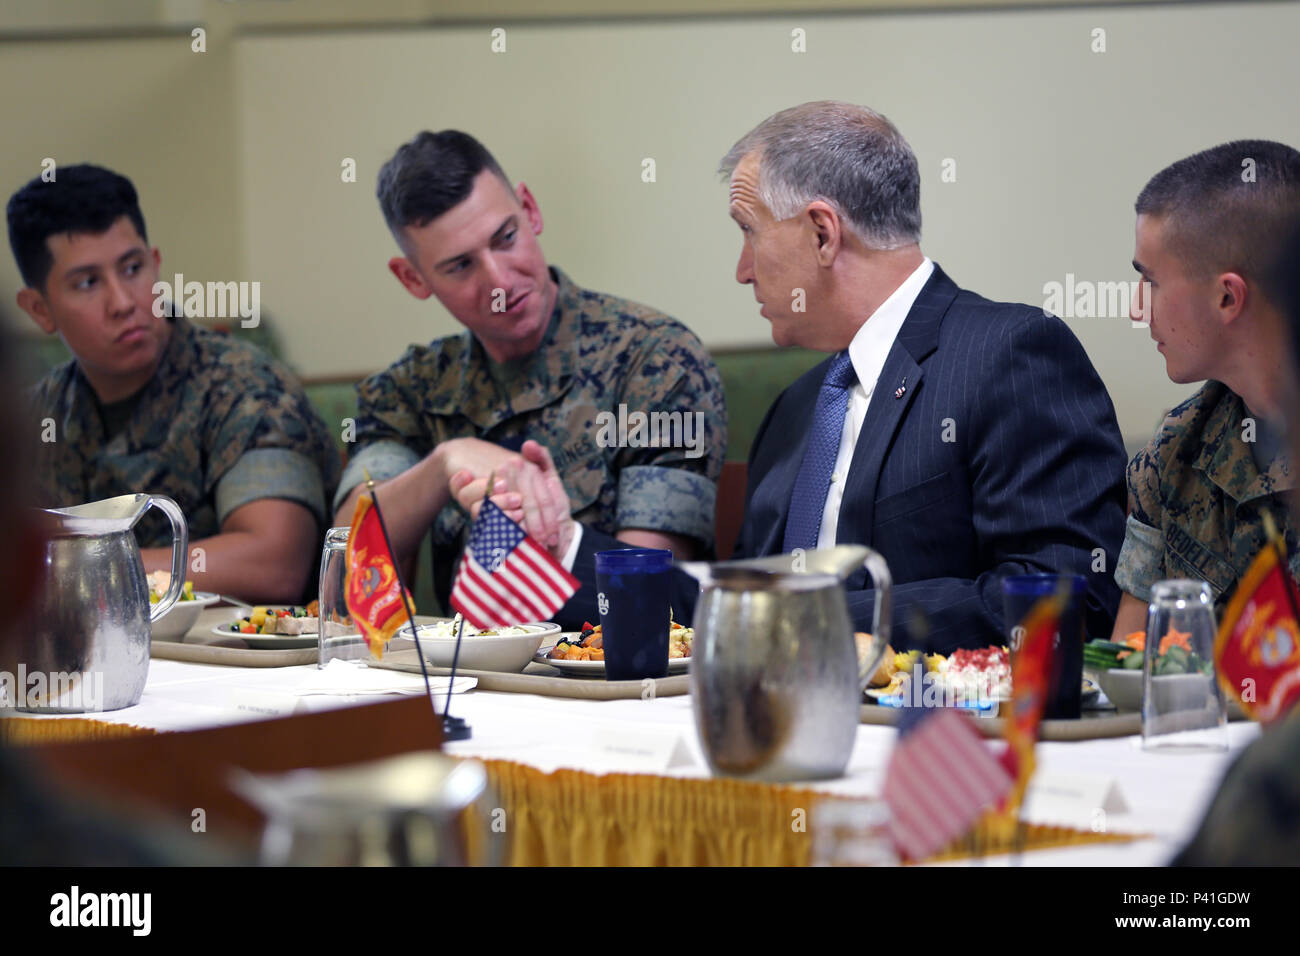 Sen. Thom Tillis, right, greets the Marines sharing a meal with him at the mess hall during a visit at Marine Corps Air Station Cherry Point, N.C., June 1, 2016. Tillis visited the air station to address the needs and priorities of the base, and assess the Marine Corps’ presence in North Carolina. Tillis also toured Fleet Readiness Center East. Tillis is a North Carolina senator. (U.S. Marine Corps photo by Lance Cpl. Mackenzie Gibson/Released) Stock Photo